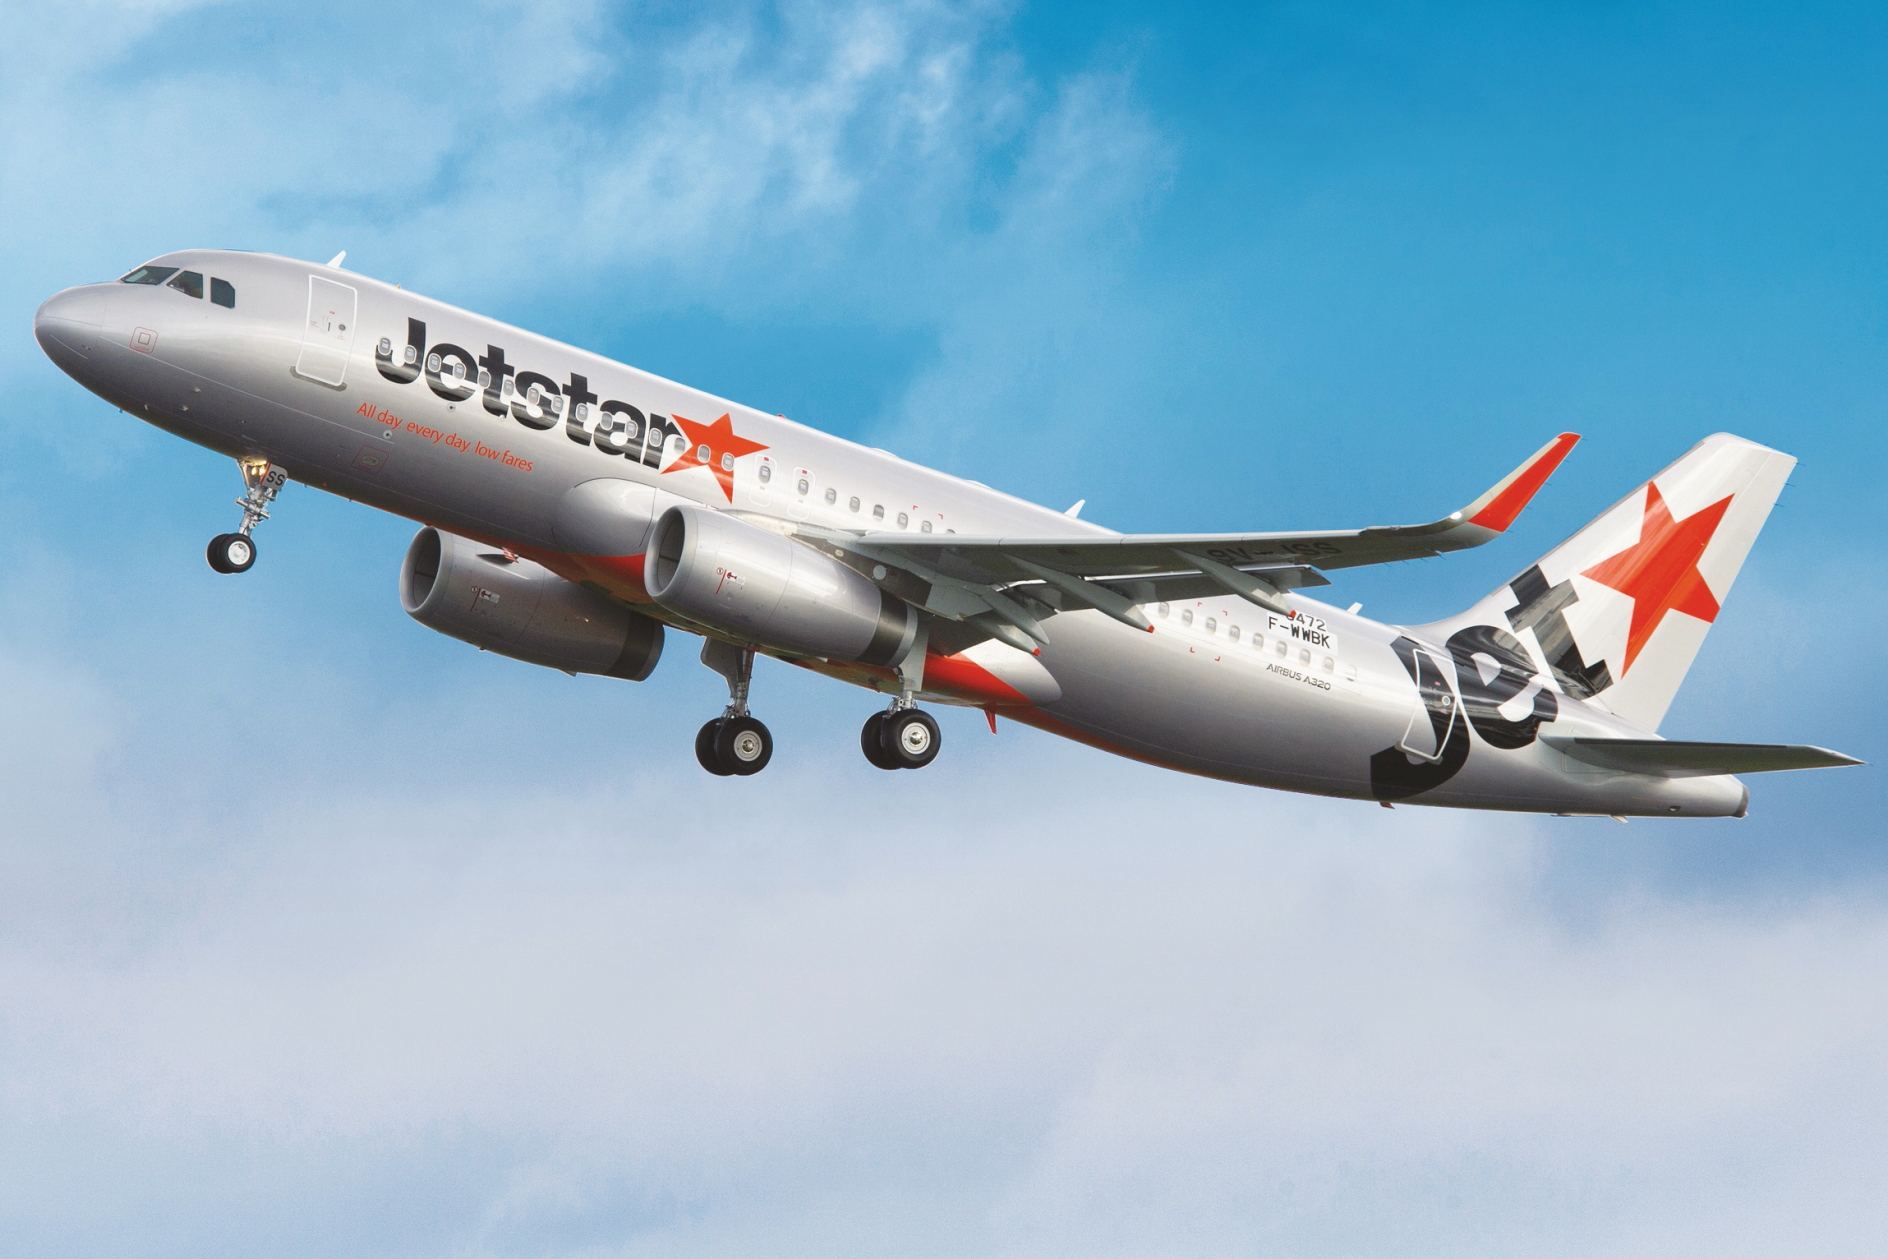 Jetstar A320. Click to enlarge.